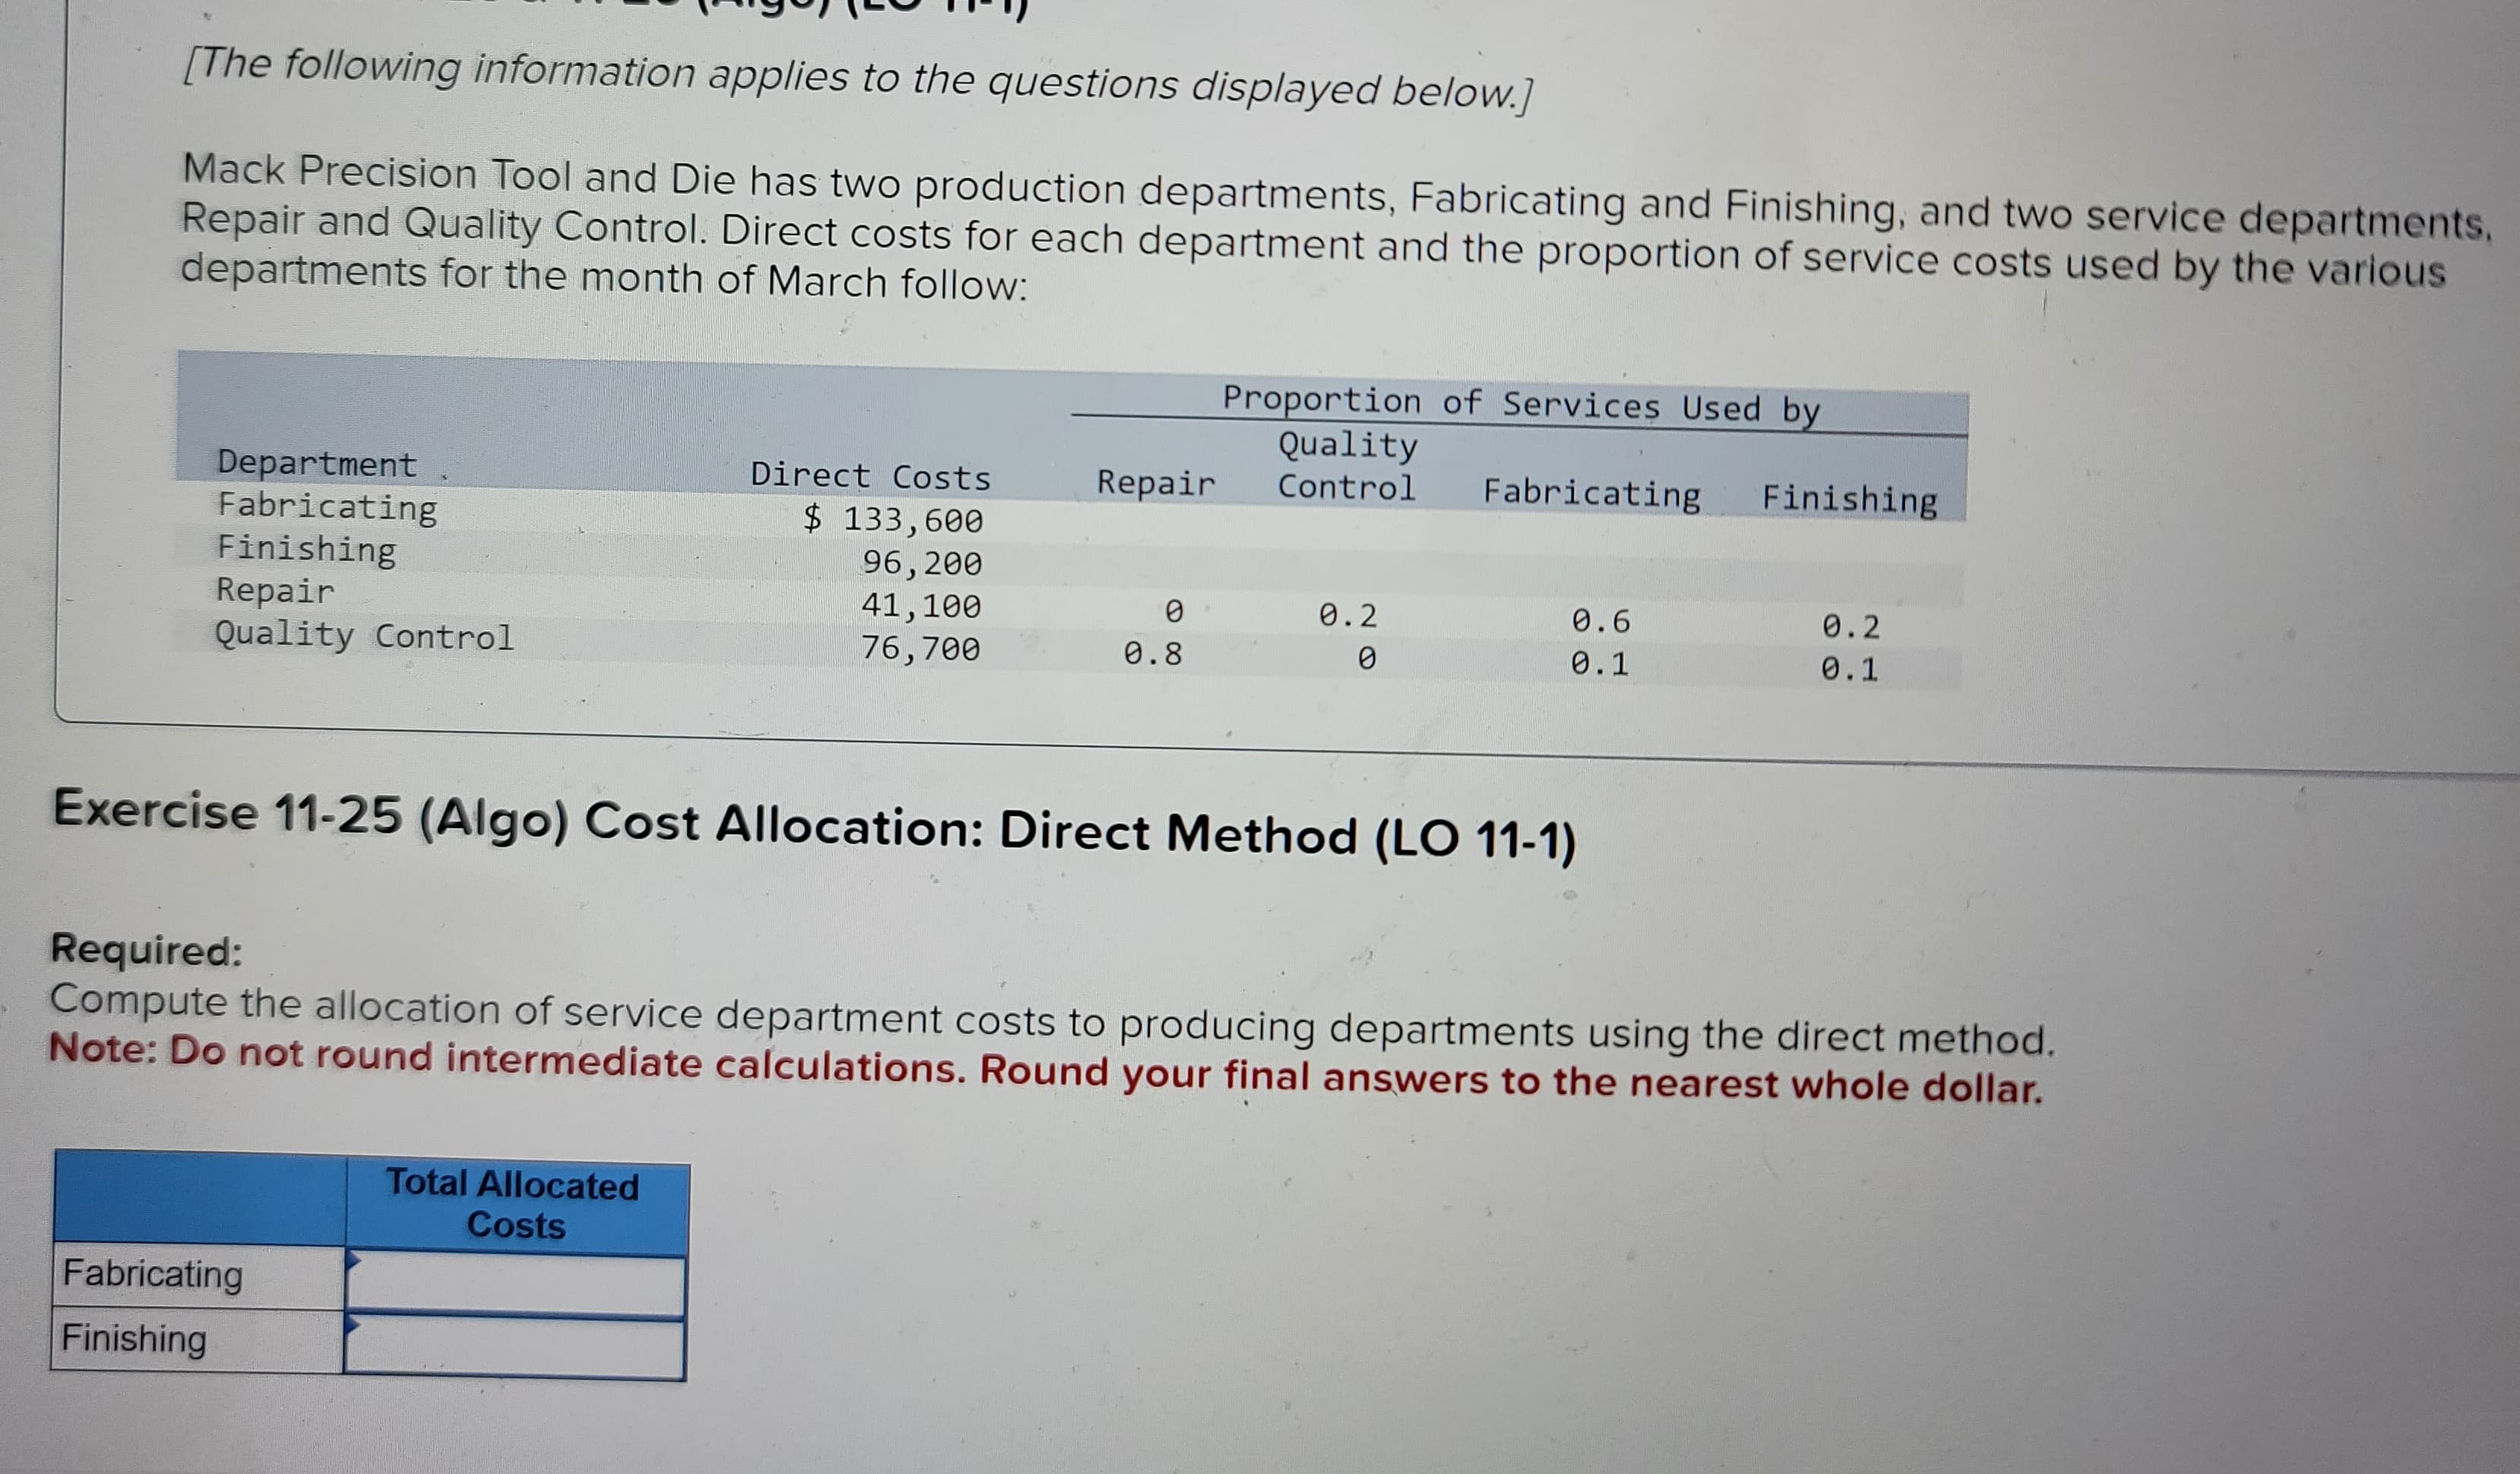 [The following information applies to the questions displayed below.]
Mack Precision Tool and Die has two production departments, Fabricating and Finishing, and two service departments,
Repair and Quality Control. Direct costs for each department and the proportion of service costs used by the various
departments for the month of March follow:
Department
Fabricating
Finishing
Repair
Quality Control
Direct Costs
$ 133,600
96, 200
41,100
76,700
Fabricating
Finishing
Repair
Total Allocated
Costs
0
0.8
Proportion of Services Used by
Quality
Control
0.2
0
Fabricating Finishing
Exercise 11-25 (Algo) Cost Allocation: Direct Method (LO 11-1)
0.6
0.1
Required:
Compute the allocation of service department costs to producing departments using the direct method.
Note: Do not round intermediate calculations. Round your final answers to the nearest whole dollar.
0.2
0.1